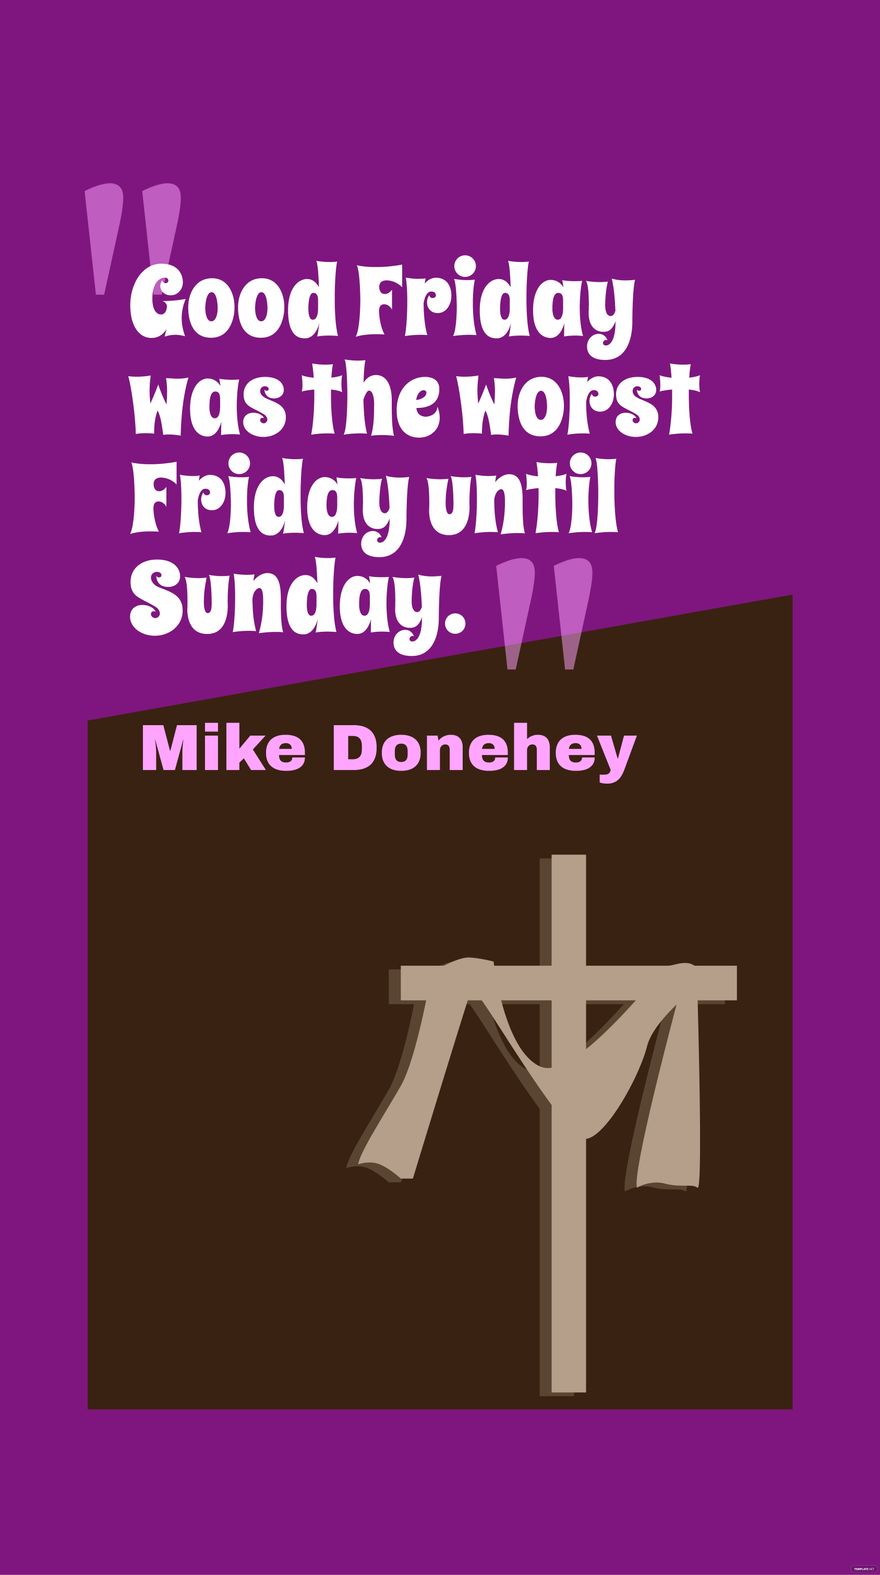 Mike Donehey - Good Friday was the worst Friday until Sunday.